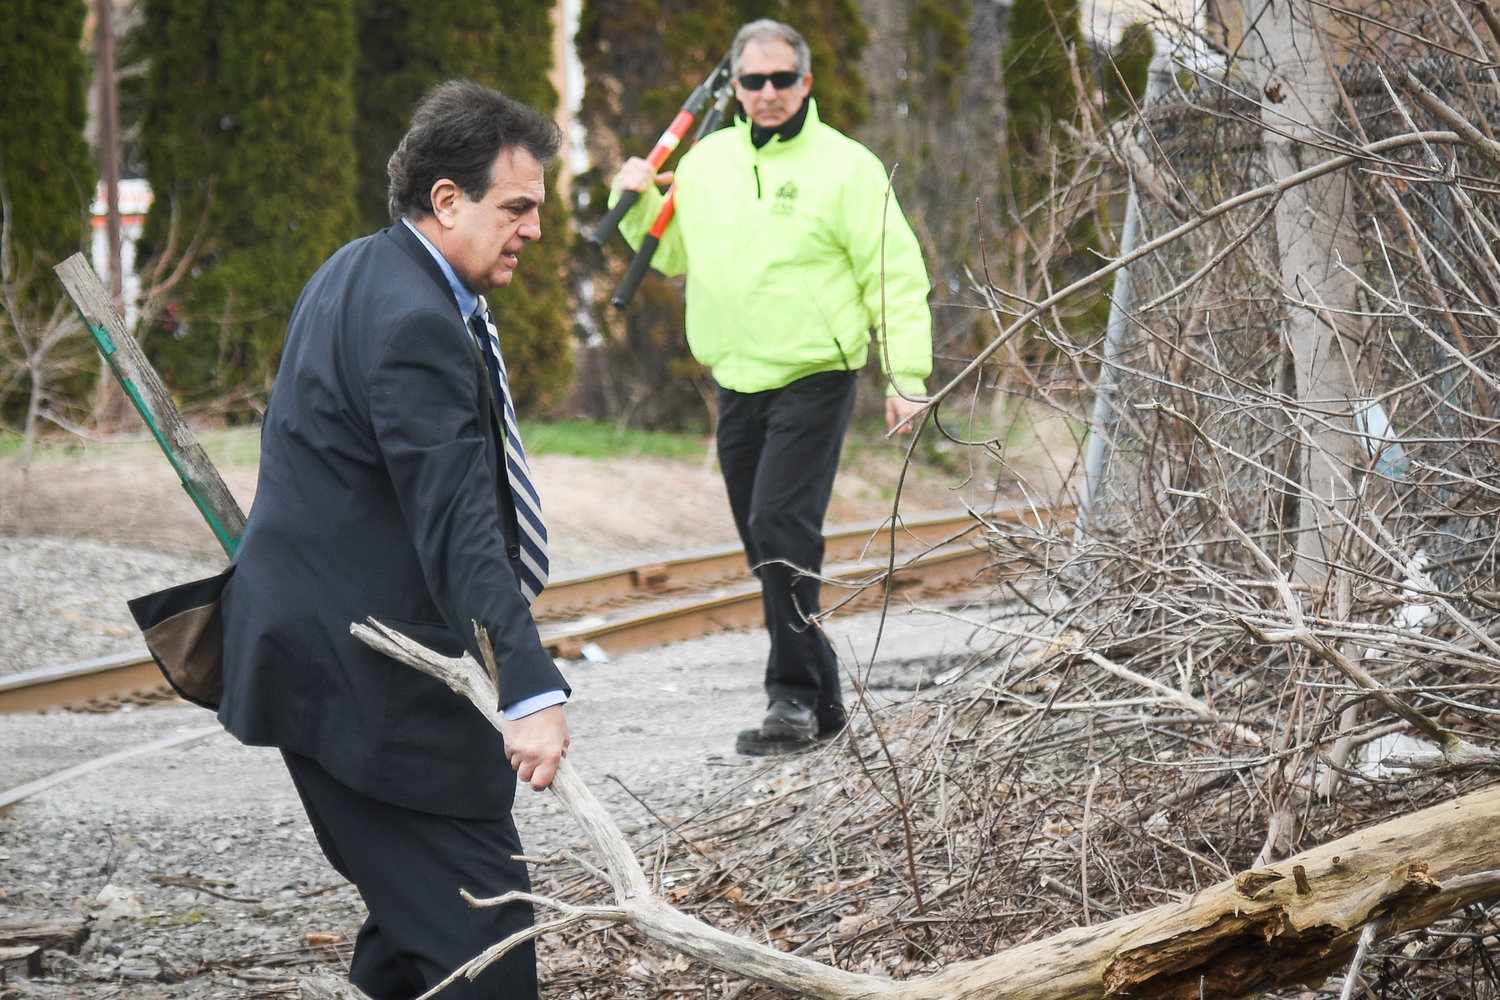 HANDS-ON MAYOR — Utica Mayor Robert Palmieri clears a fallen tree branch on Schuyler Street on Wednesday, as part of his weekly Quality of Life Sweep series. The sweeps are conducted in different neighborhoods throughout the year to touch base with the community and clean up the streets and sidewalks. It also gives local business owners a chance to express concerns or make suggestions.